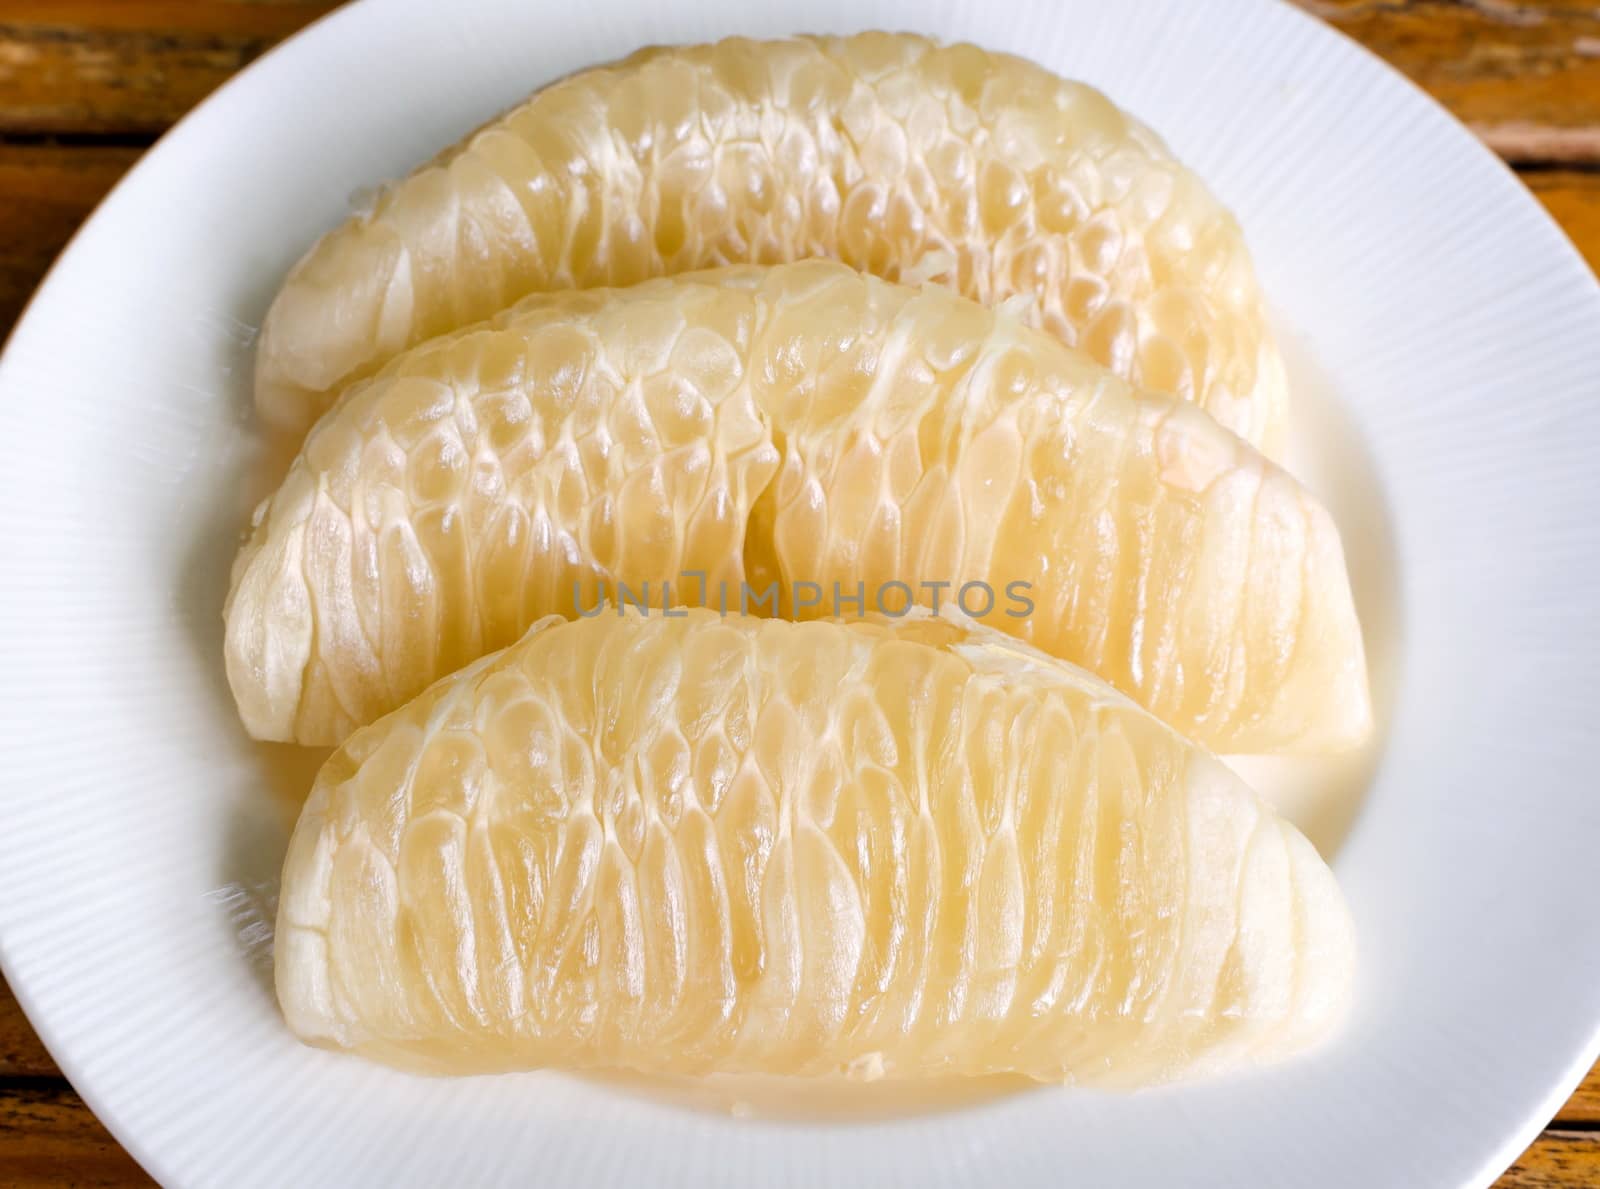 Thai pomelo fruit Peeled in white dish on wood table.